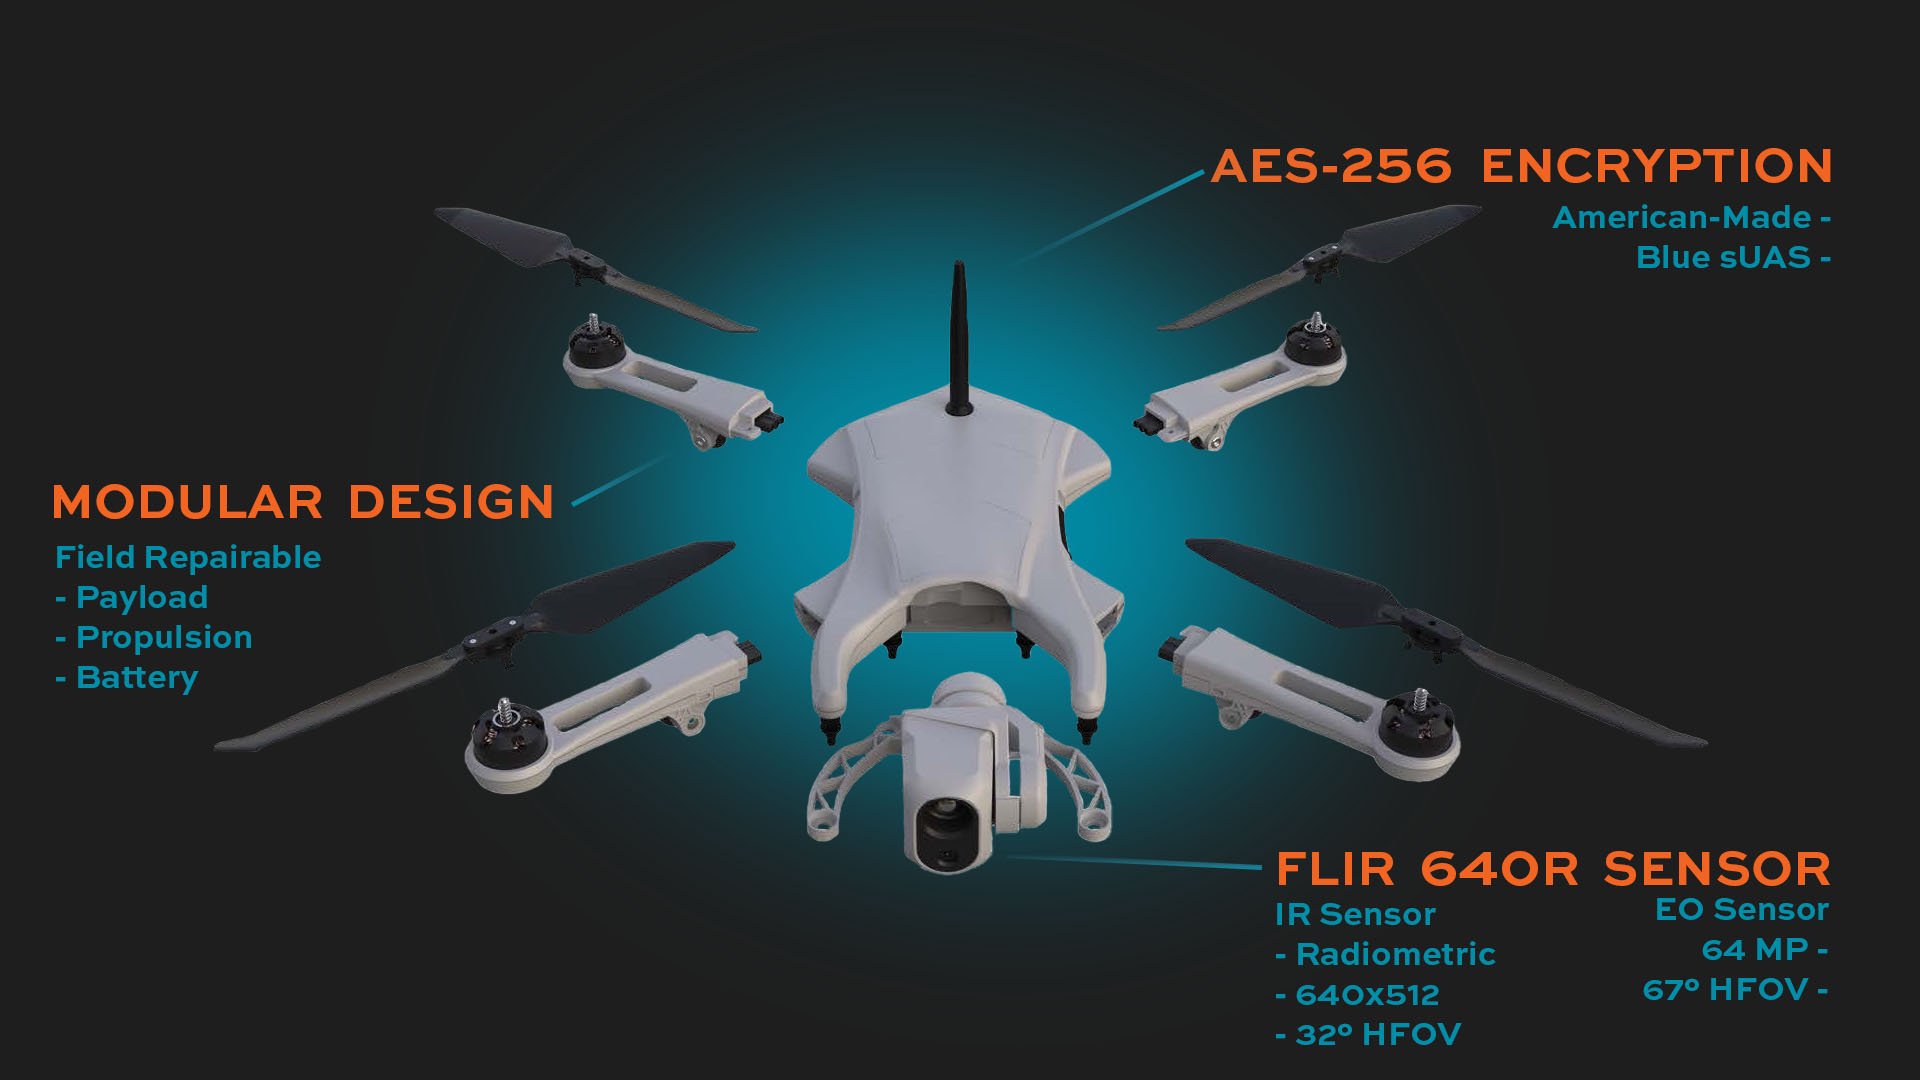 Teal 2 shown with replaceable parts, AES 256 encryption and FLIR 640R sensor